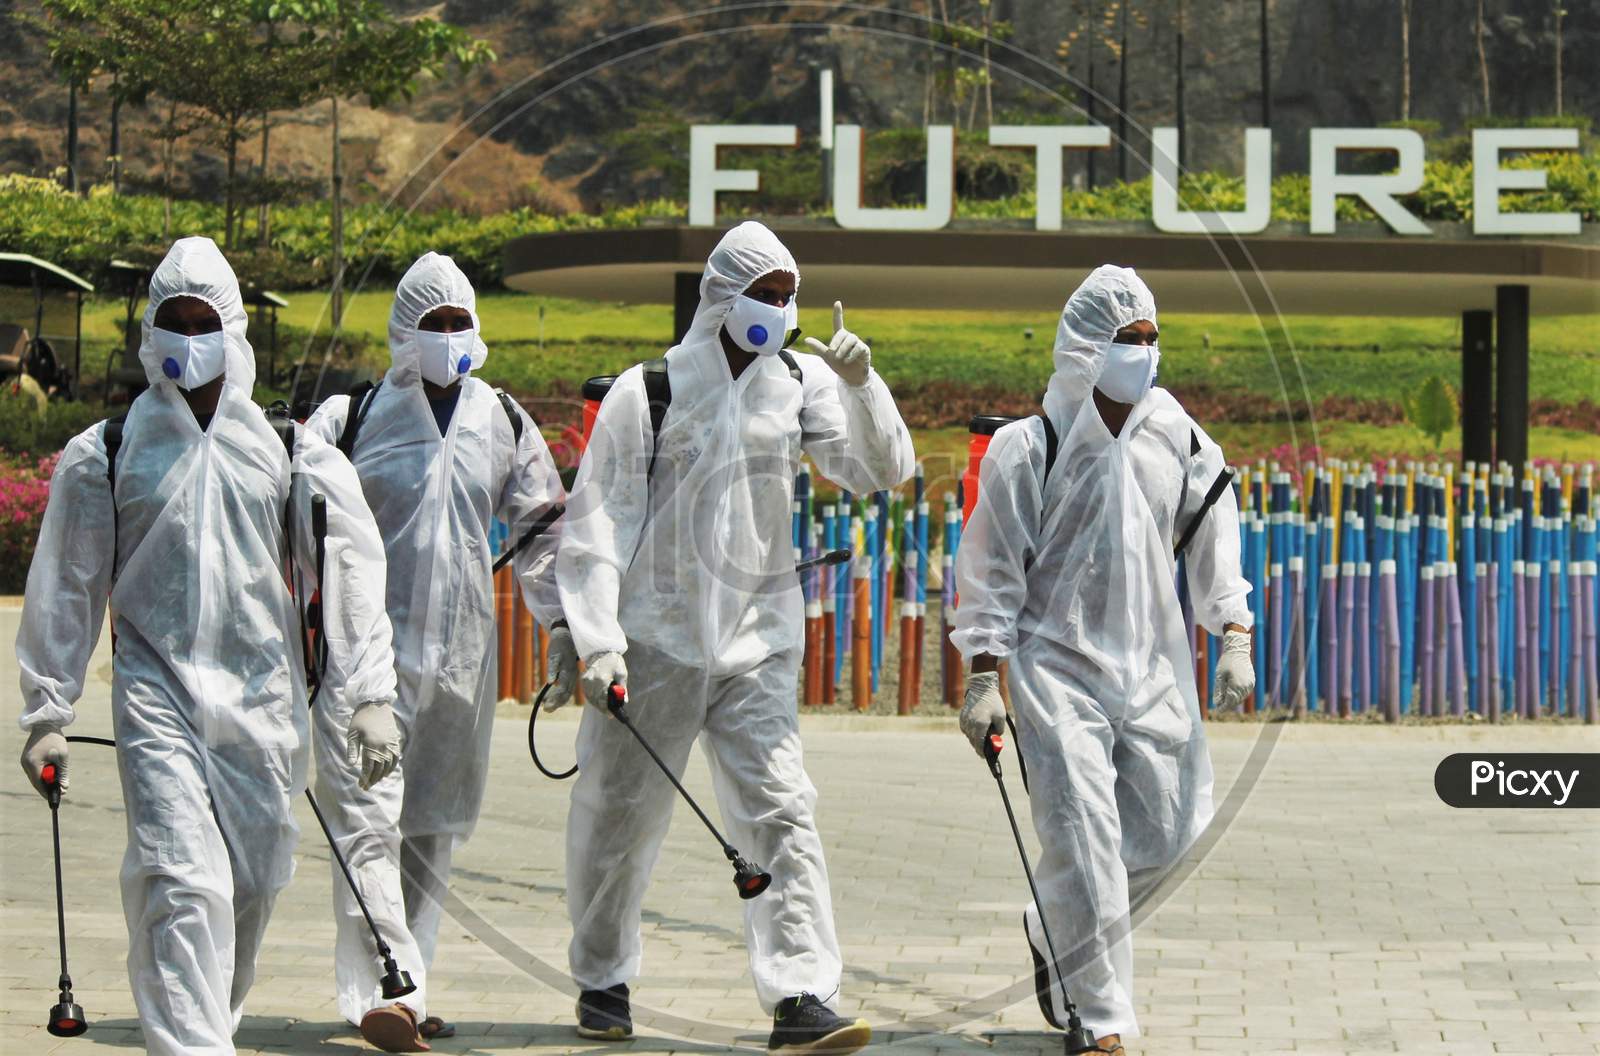 Workers wearing protective suits on their way to disinfect slum area and a temple as a preventive measure against the spread of coronavirus disease (COVID-19) in Mumbai, India on March 28, 2020.